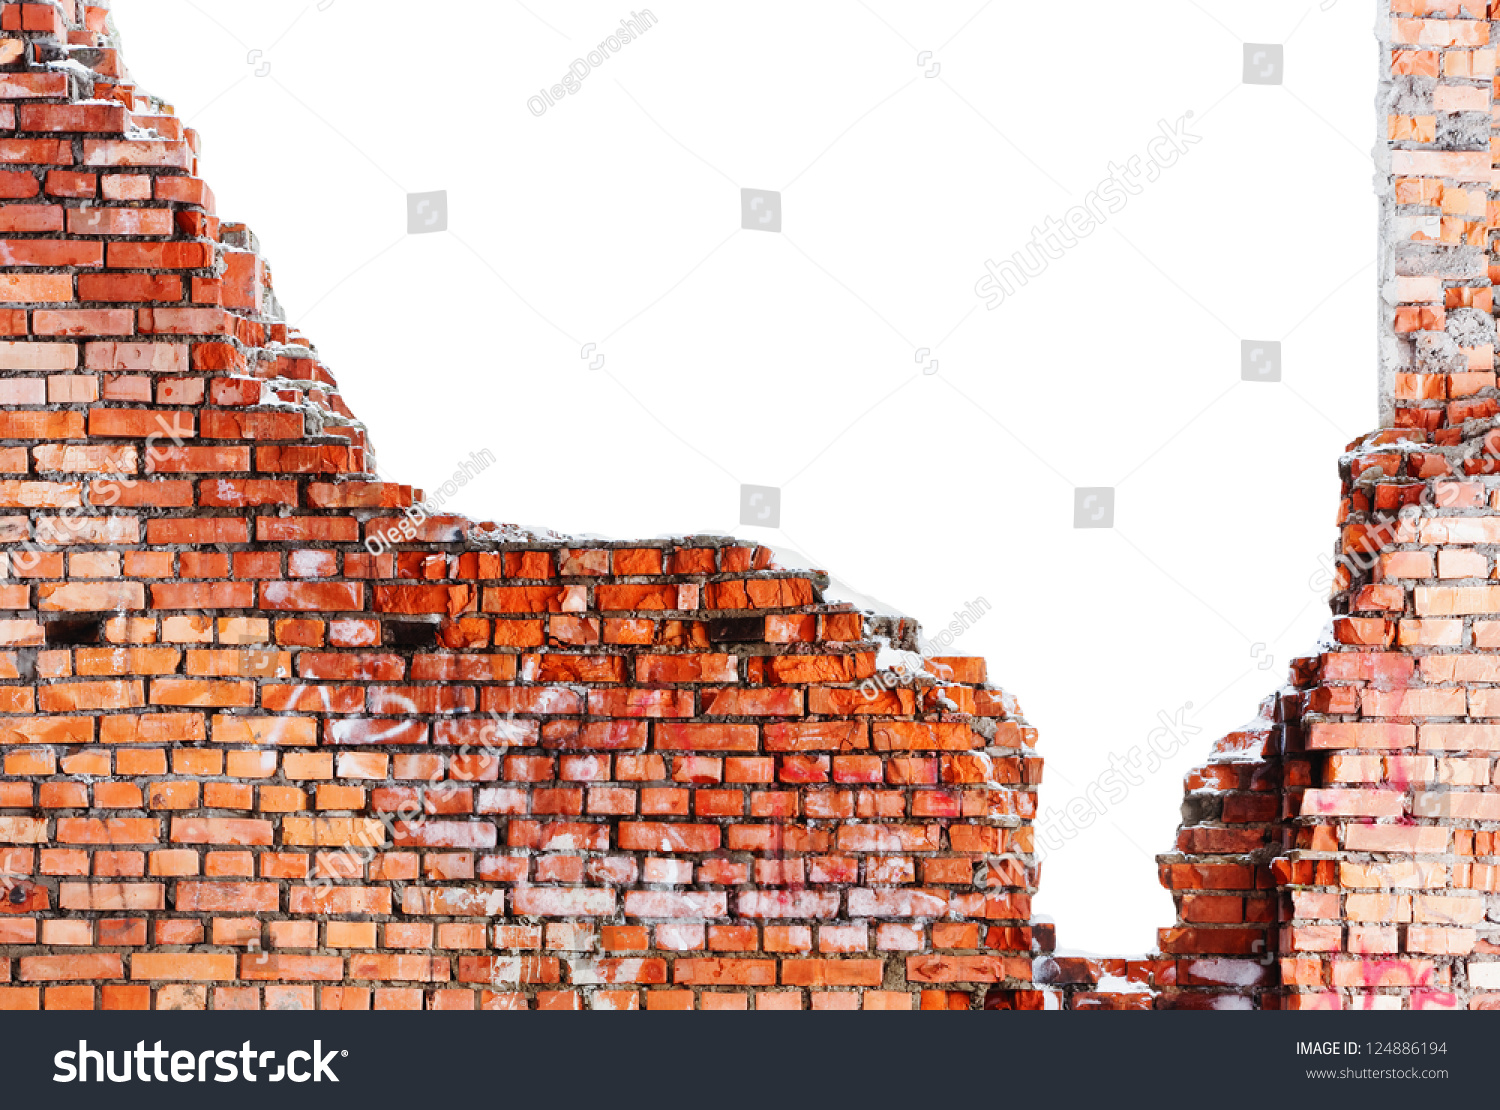 stock-photo-old-destroyed-brick-wall-of-the-building-with-a-white-background-124886194.jpg